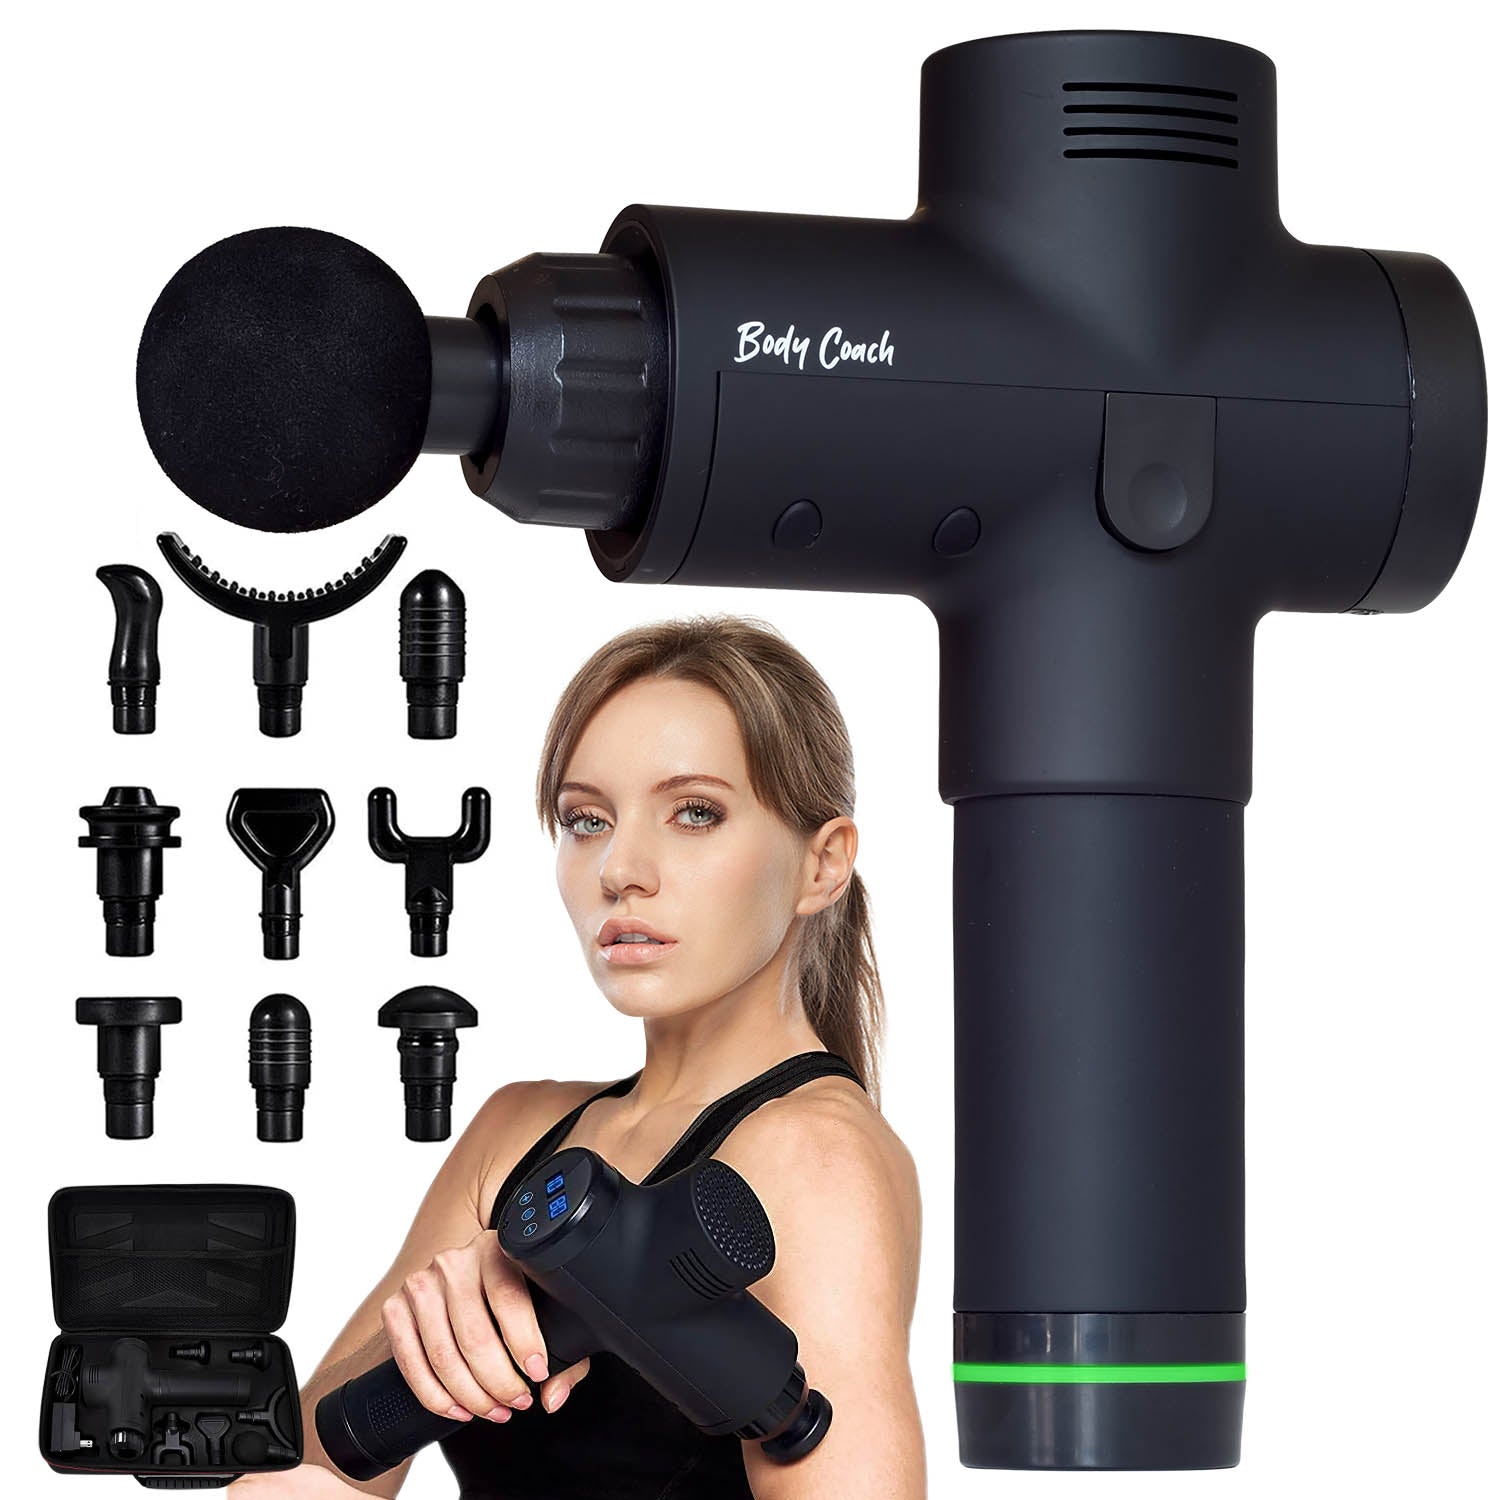 24 Best Massage Guns 2021 for Every Budget, Starting at £40